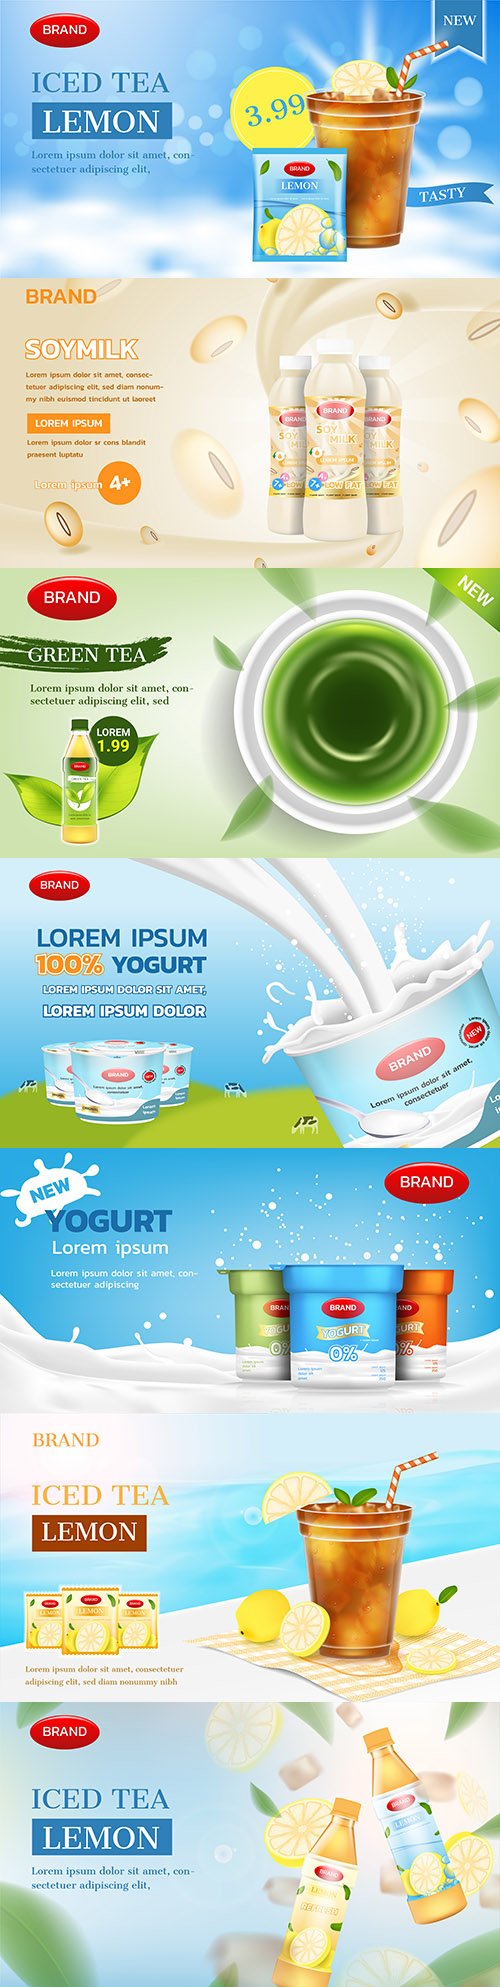 Dairy products and drinks advertising brand design template